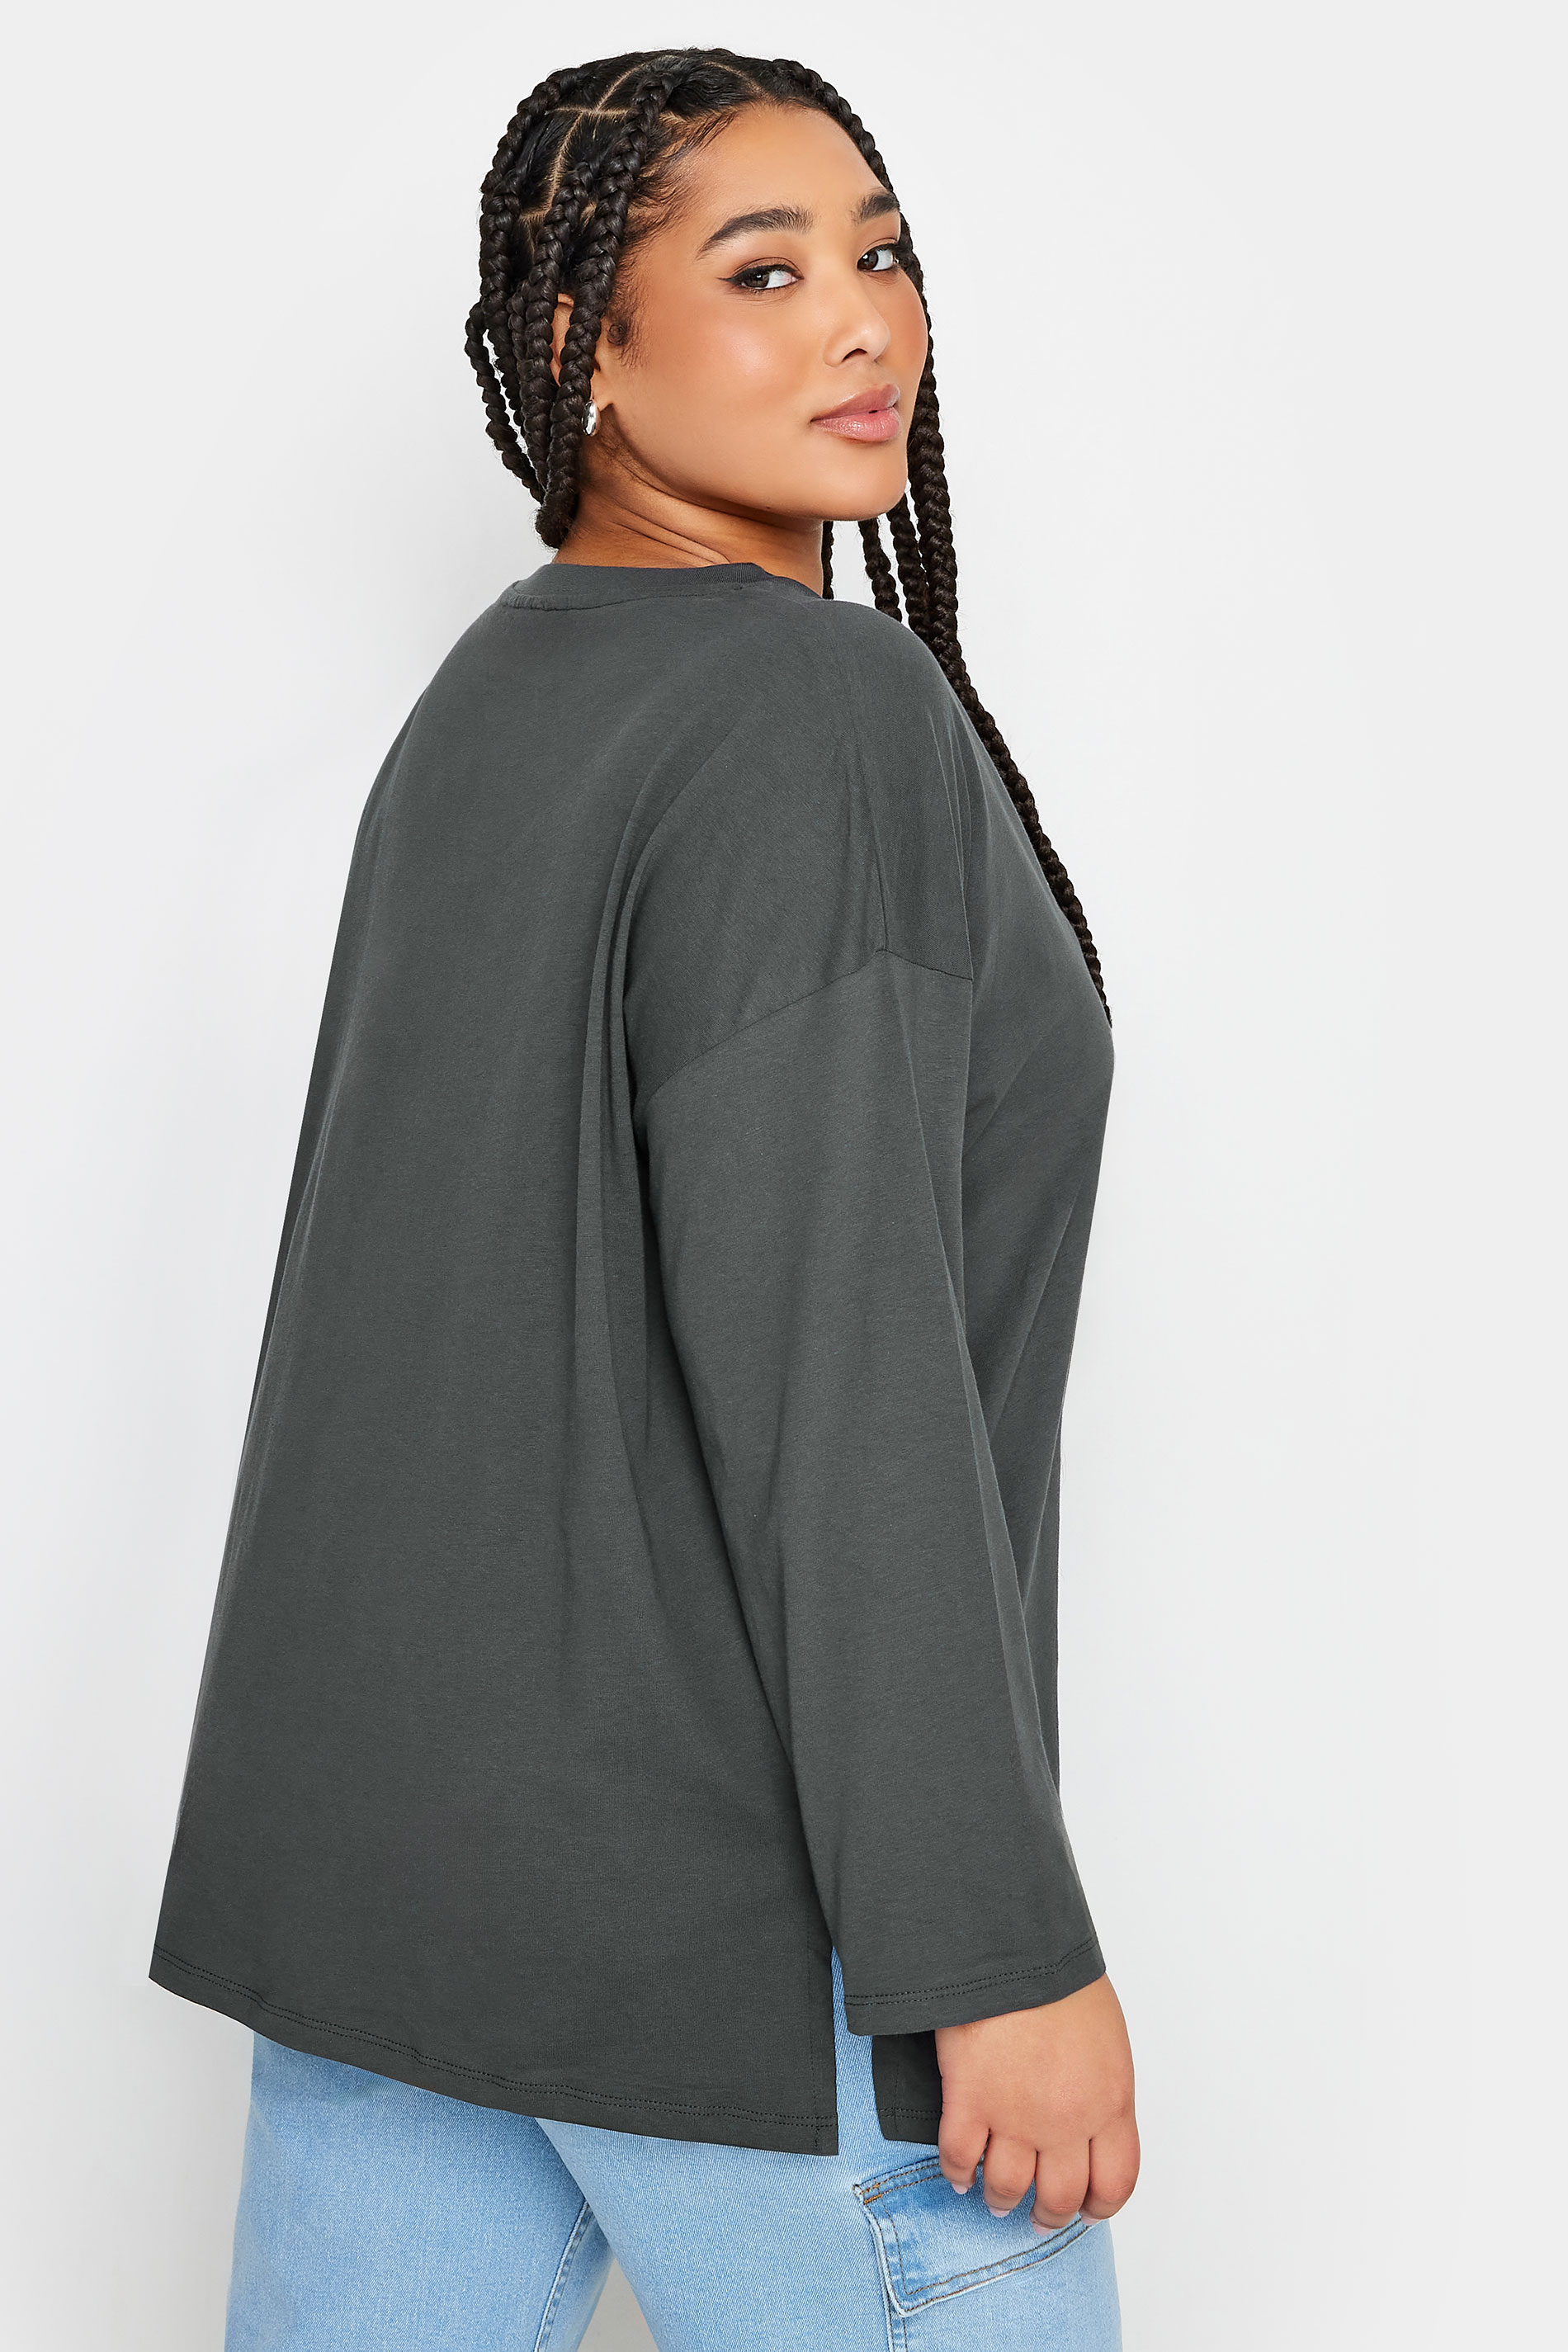 LIMITED COLLECTION Plus Size Charcoal Grey Utility Pocket Long Sleeve T-Shirt | Yours Clothing 3